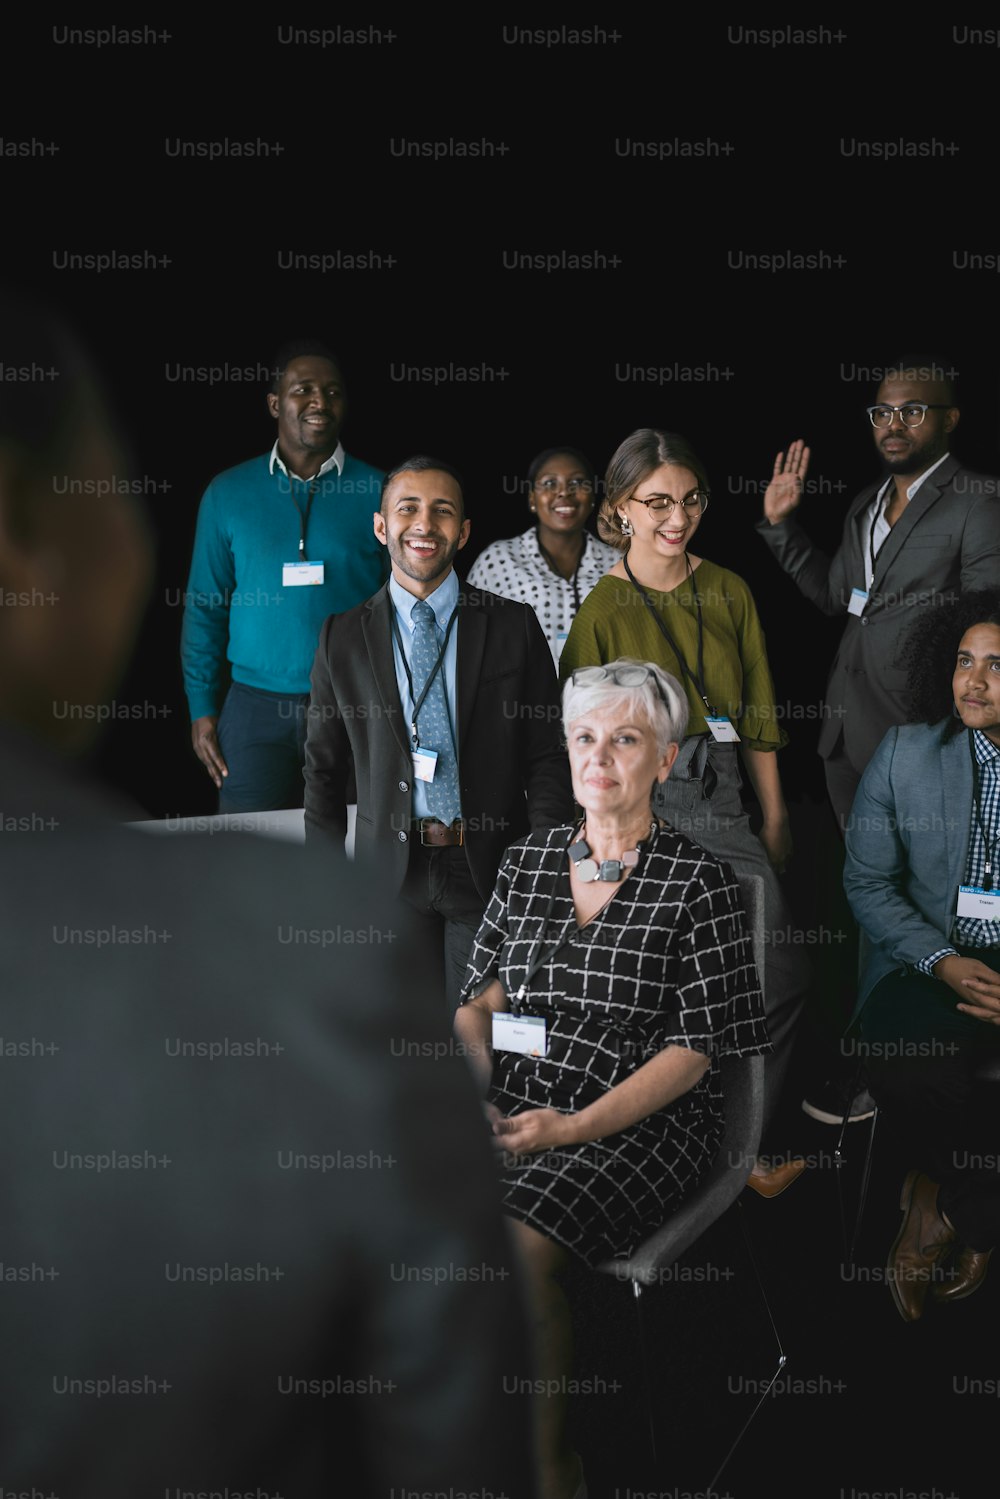 Black african businesswoman giving a presentation at a business conference. Mixed race group are interacting with her